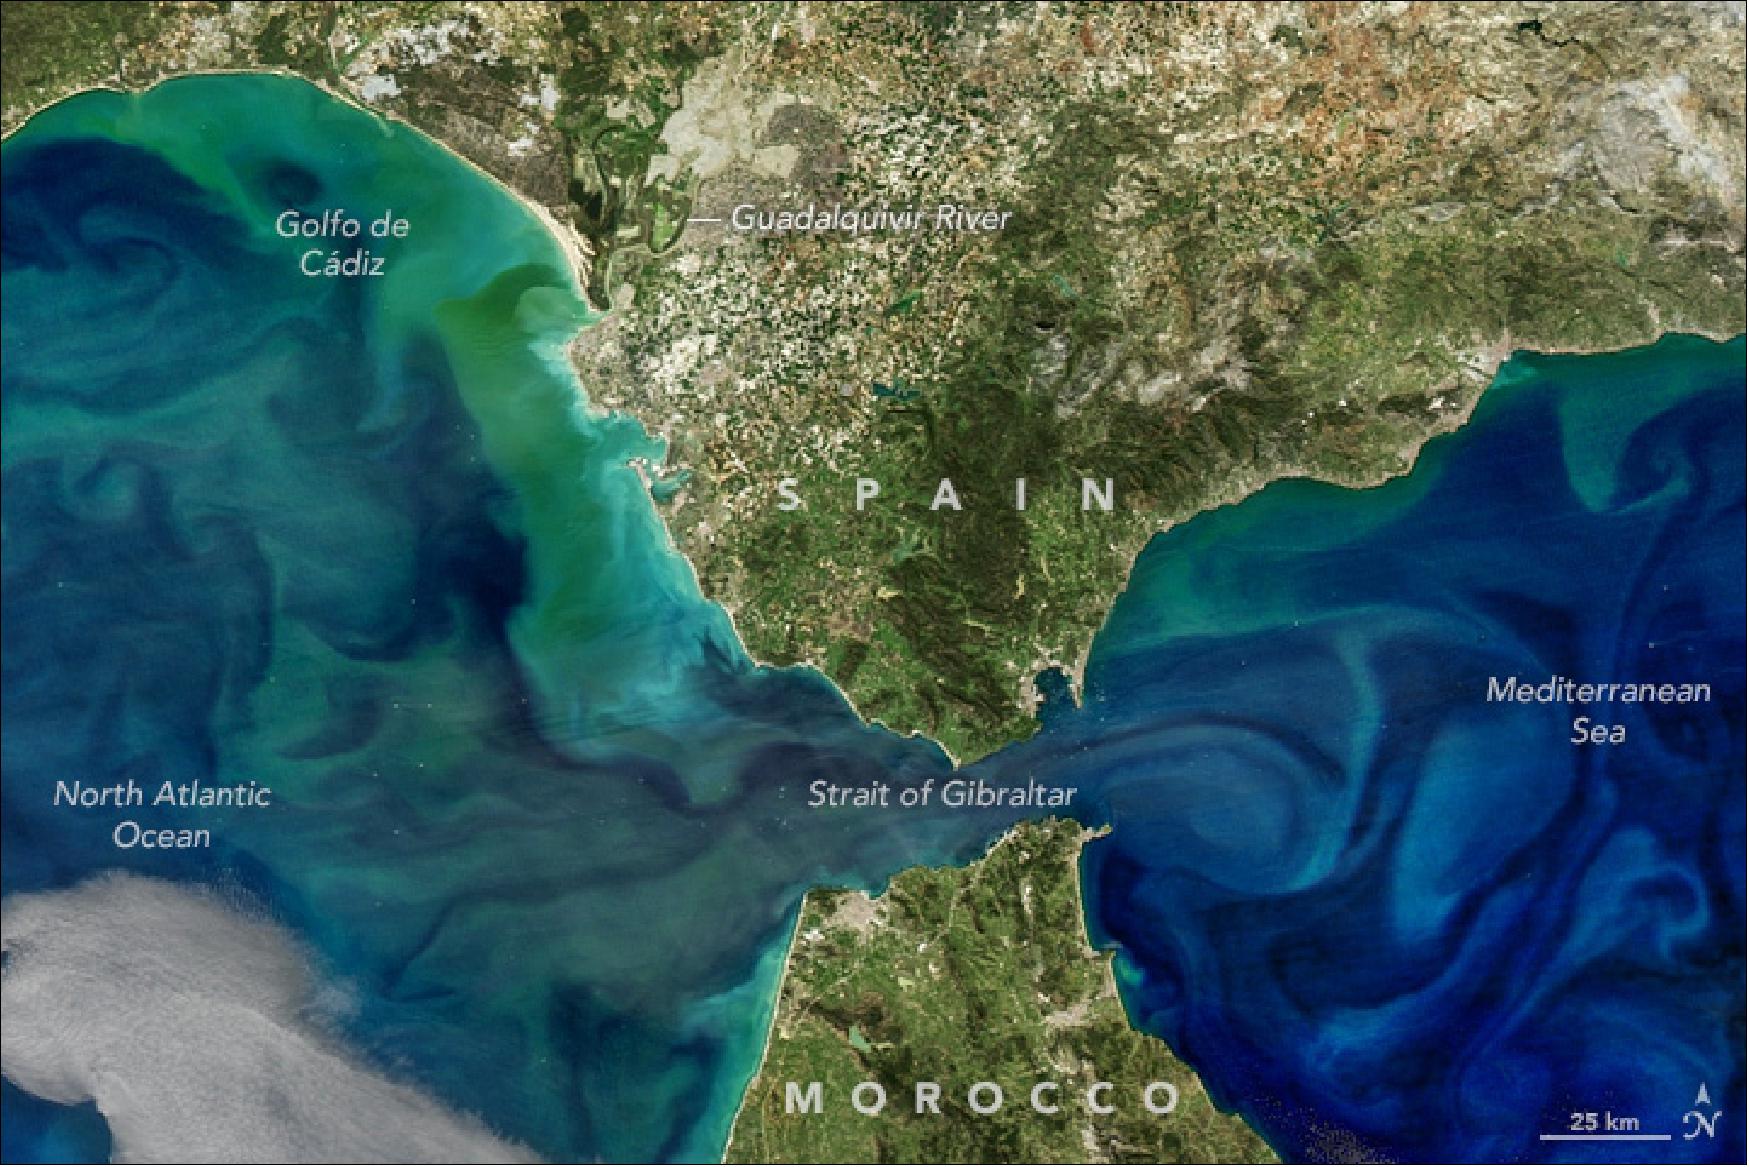 Figure 108: MODIS and VIIRS observations on Aqua and Suomi NPP, respectively, showing water conditions near the Strait of Gibraltar, acquired on March 8, 2017 (image credit: NASA Earth Observatory, image by Norman Kuring, text by Kathryn Hansen)